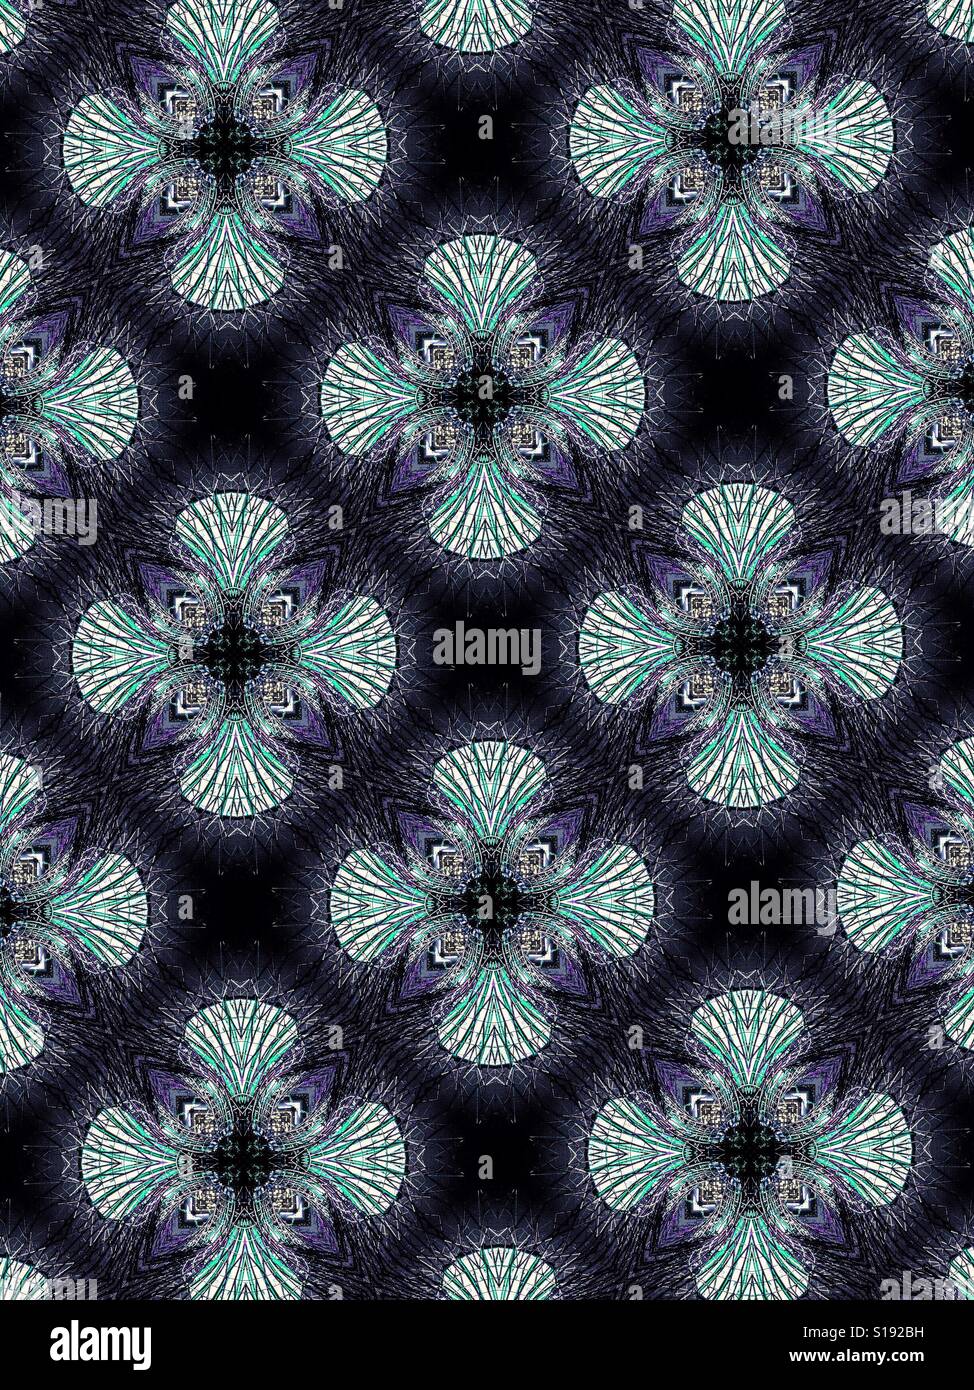 An abstract design featuring white filigree shapes on a purple background Stock Photo